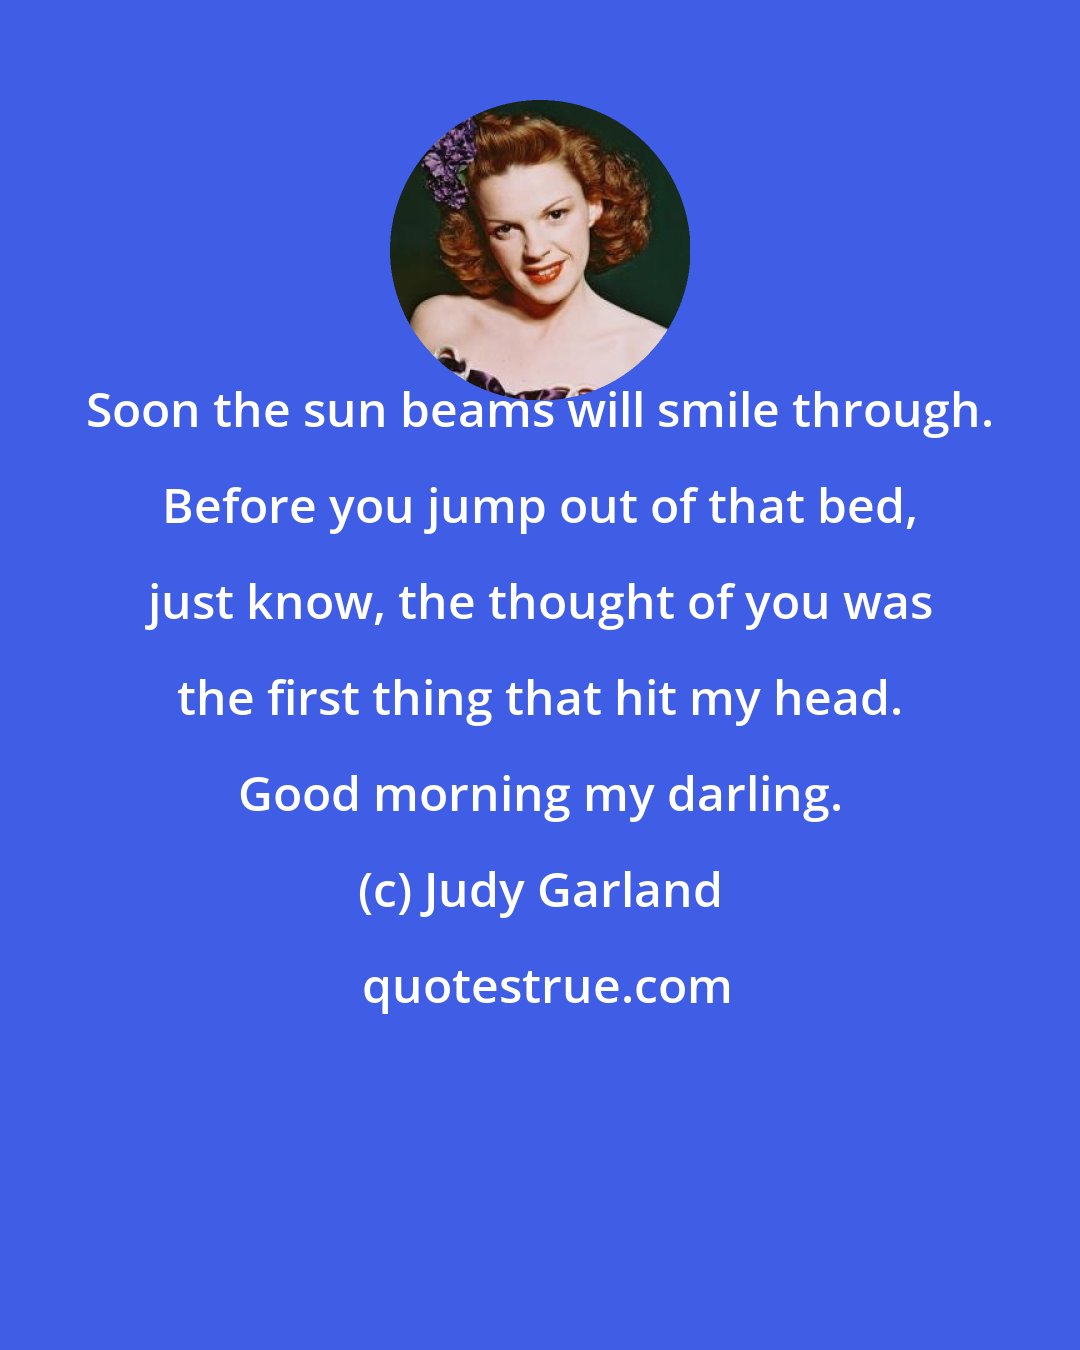 Judy Garland: Soon the sun beams will smile through. Before you jump out of that bed, just know, the thought of you was the first thing that hit my head. Good morning my darling.